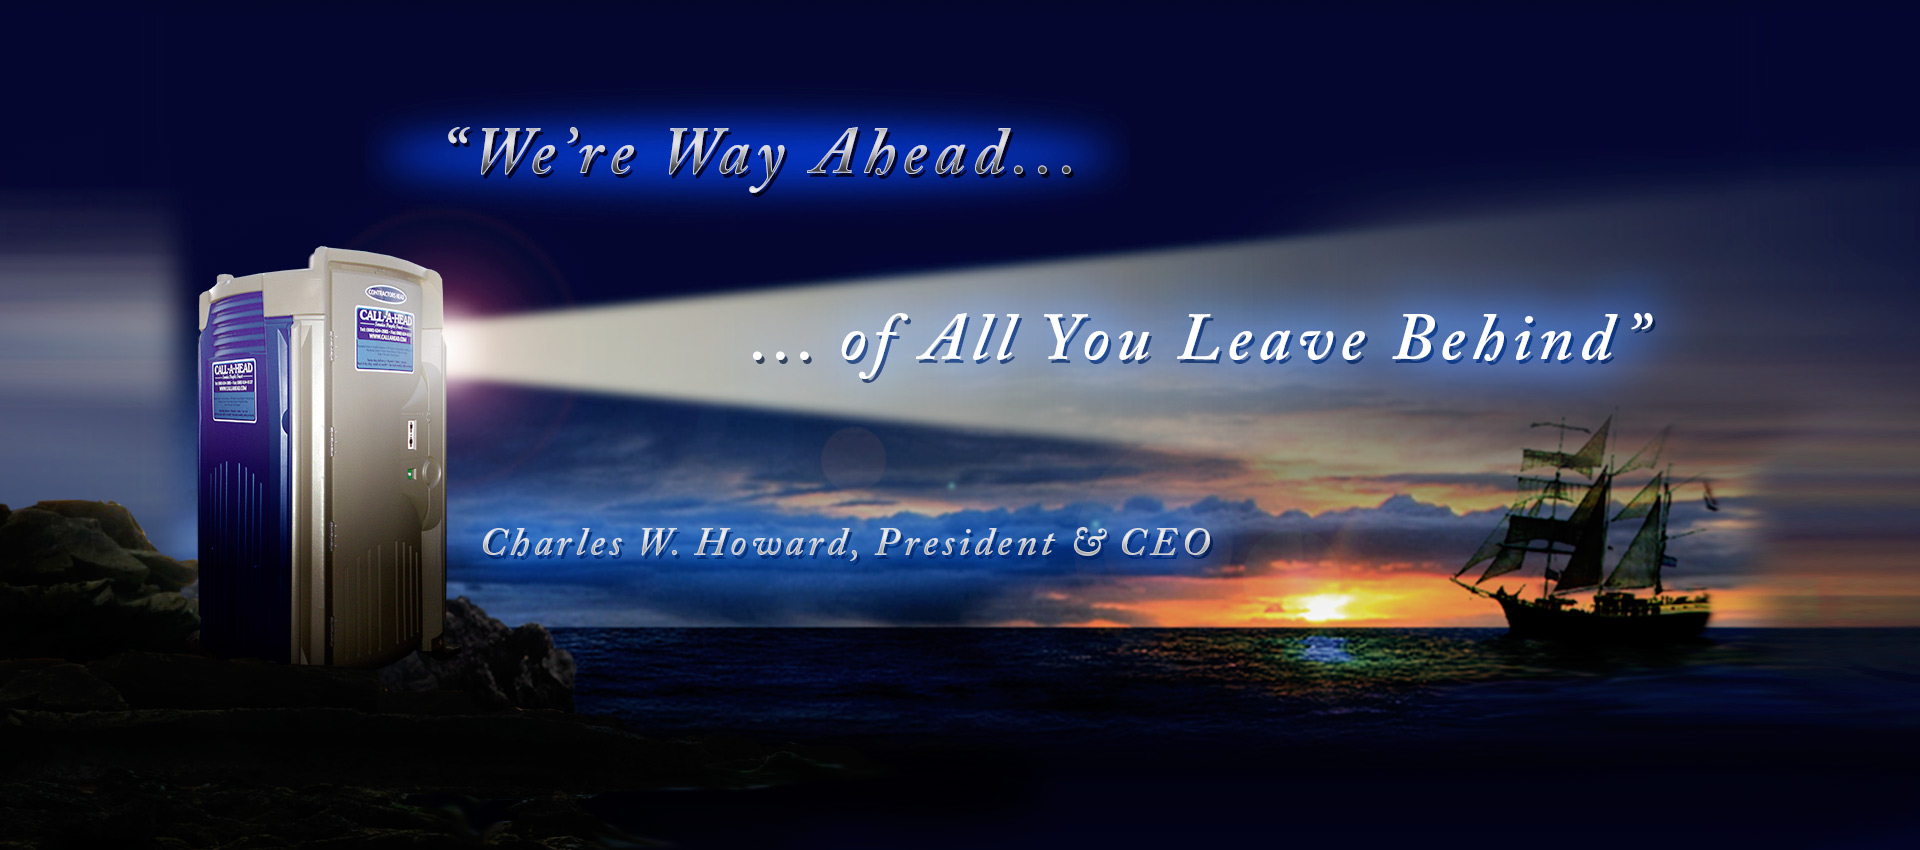 "We are way ahead of all you leave behind" - Charles W. Howard, President & CEO